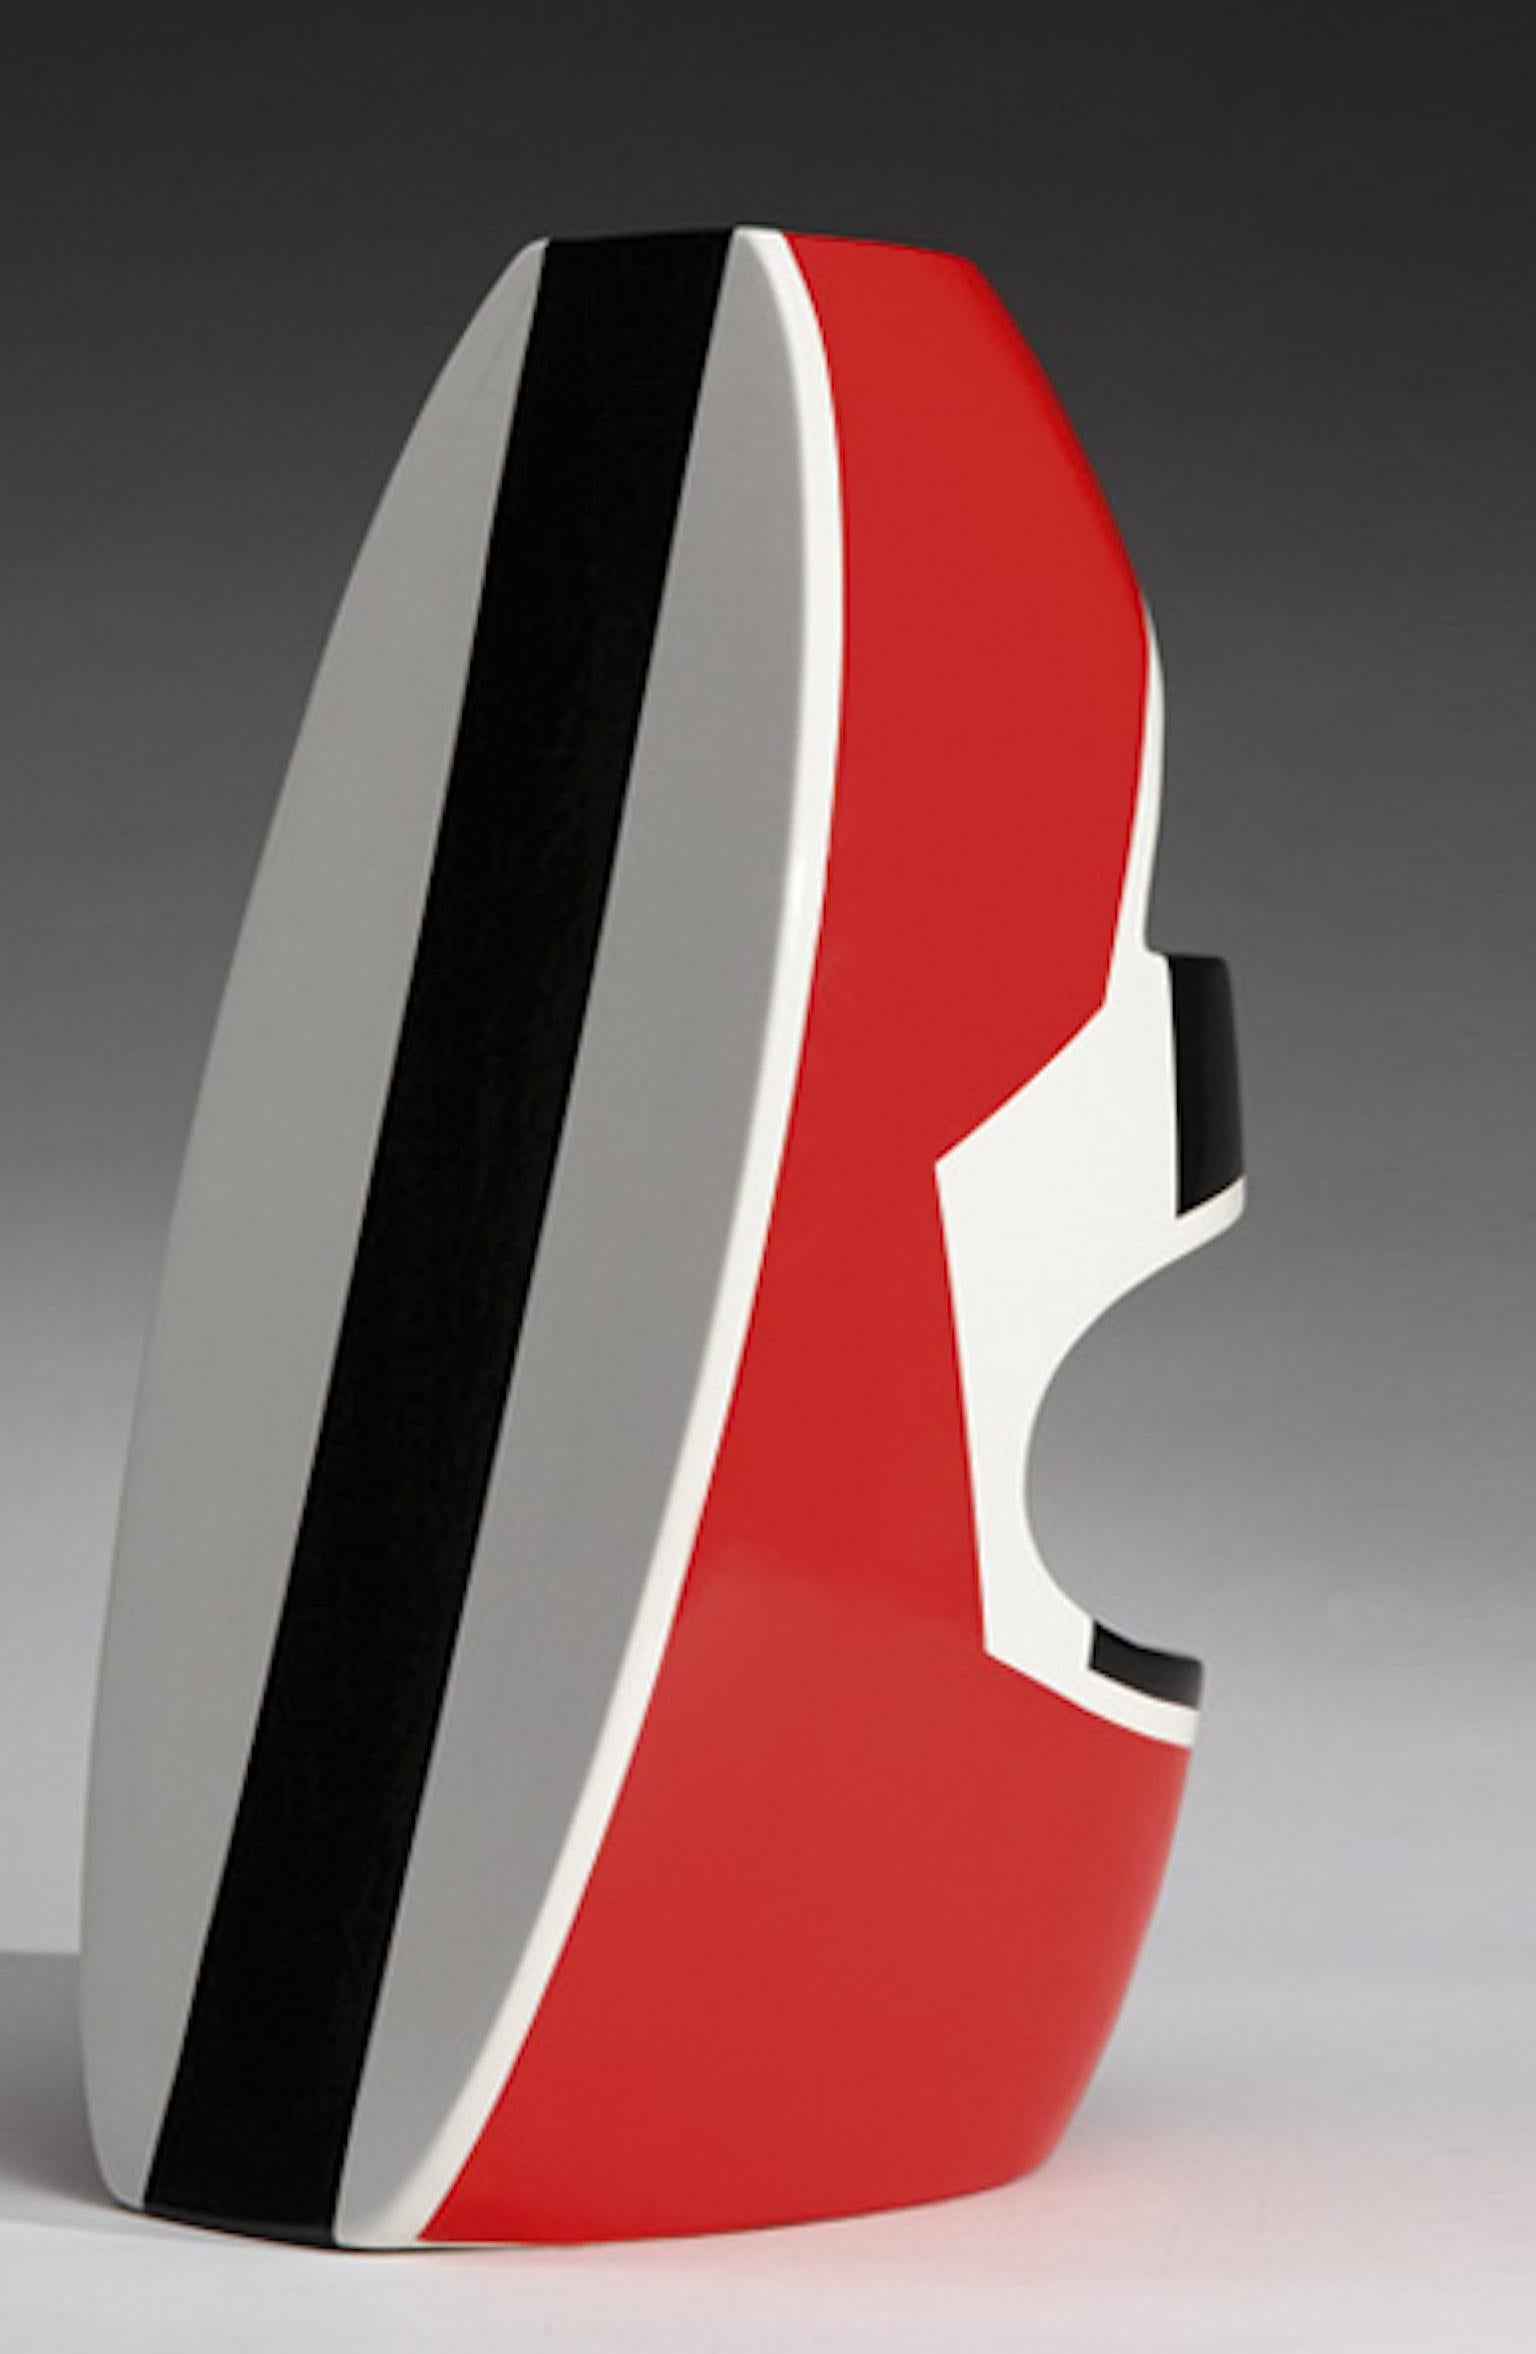 Enameled Italian Ceramic Vase Red Model by George Sowden for Superego Editions. For Sale